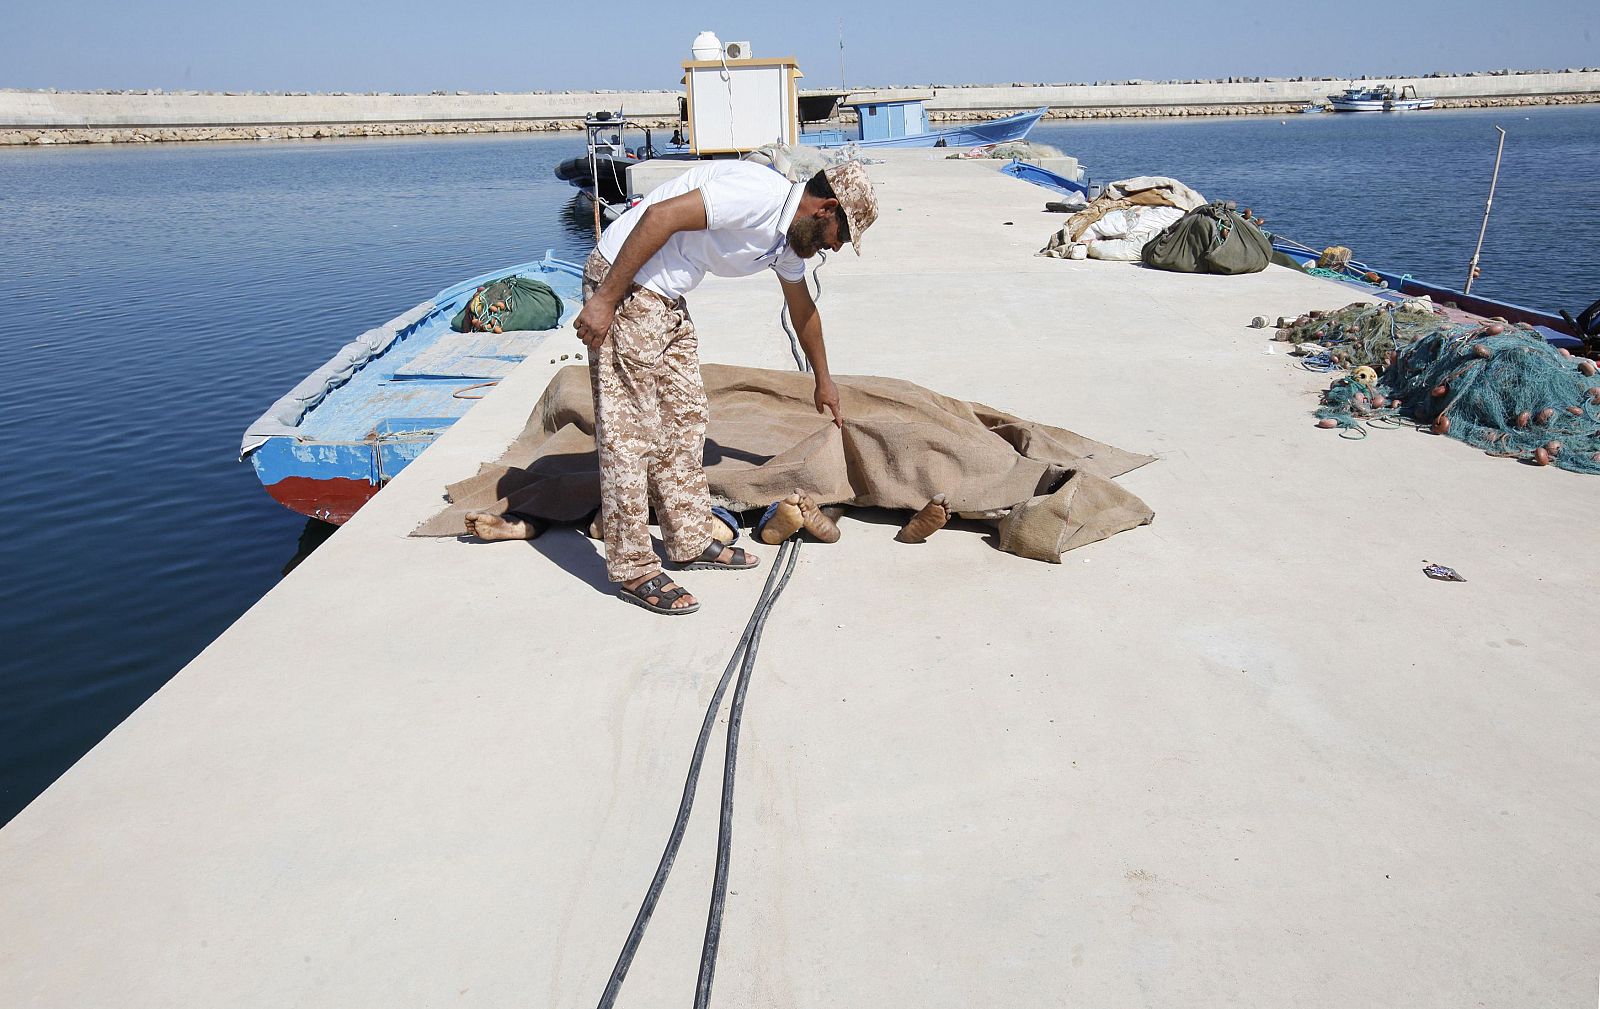 A man inspects the bodies of three African migrants that were recovered by the Libyan coastguard, after their boat sunk off the coastal town of Garaboly, al este de la capital Trípolo, a mediados de este mes.